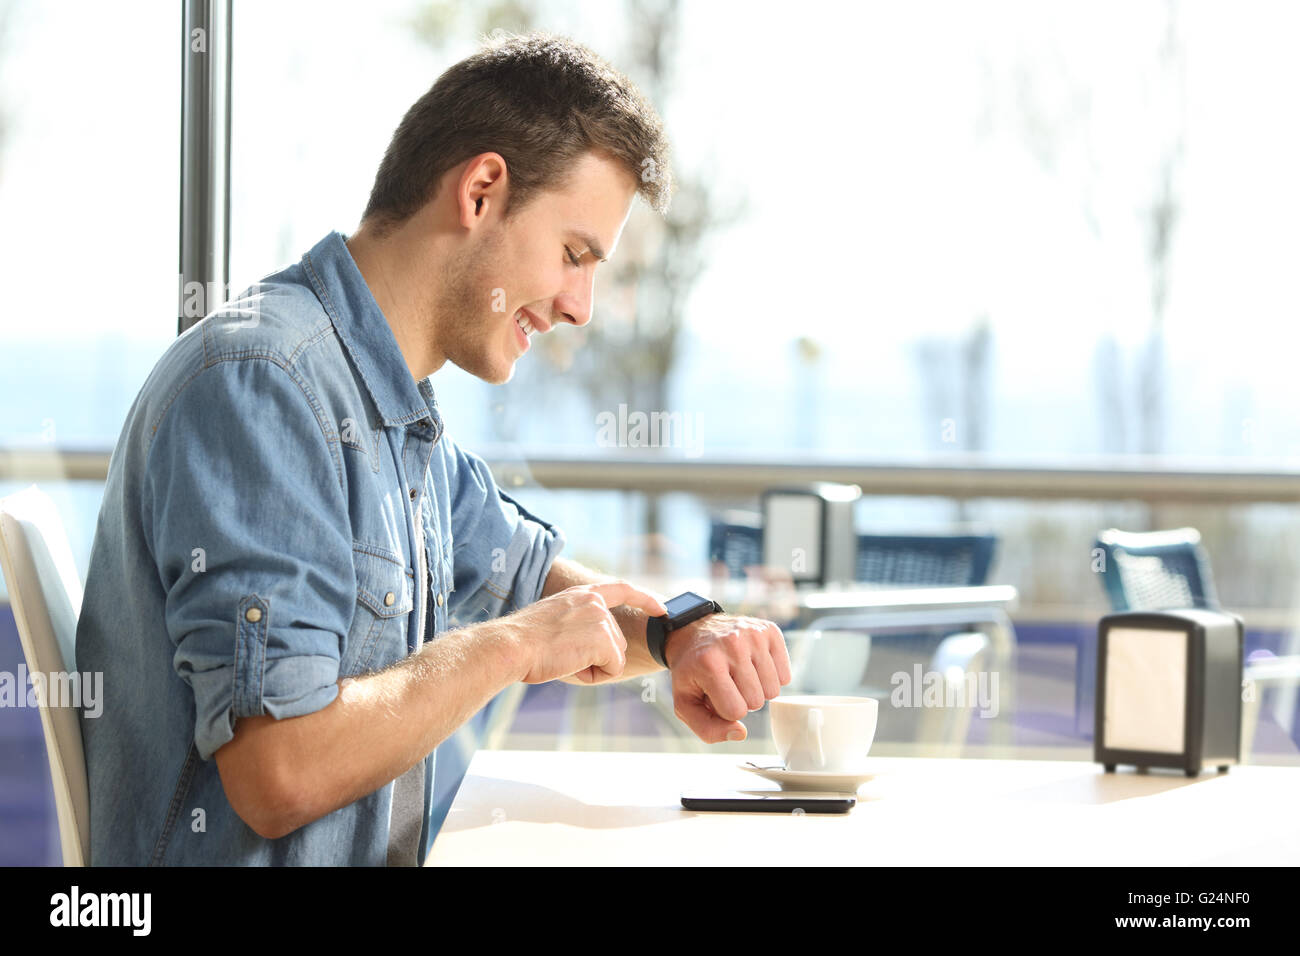 Profile of a man using a generic smartwatch with a mobile phone on line taking a break in a bar with drinks Stock Photo